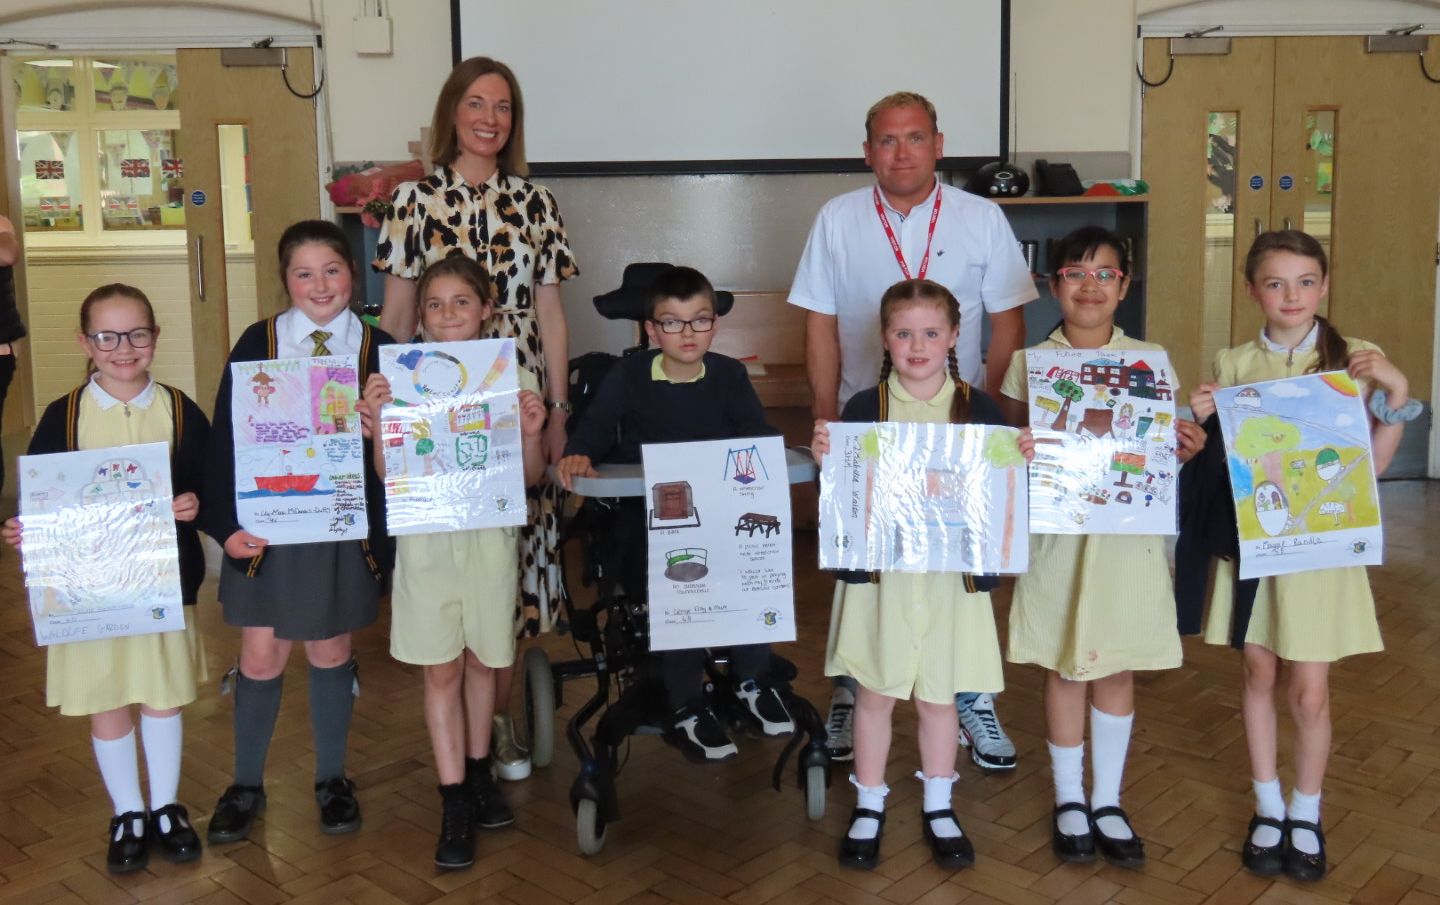 Churchtown Primary School pupils took part in an art competition as part of the Make A Change For Botanic Family Fun Day. There were four themes of the competition which included: Year 3 & 4, What I'd love to see in the park in the future. Photo by Andrew Brown Media